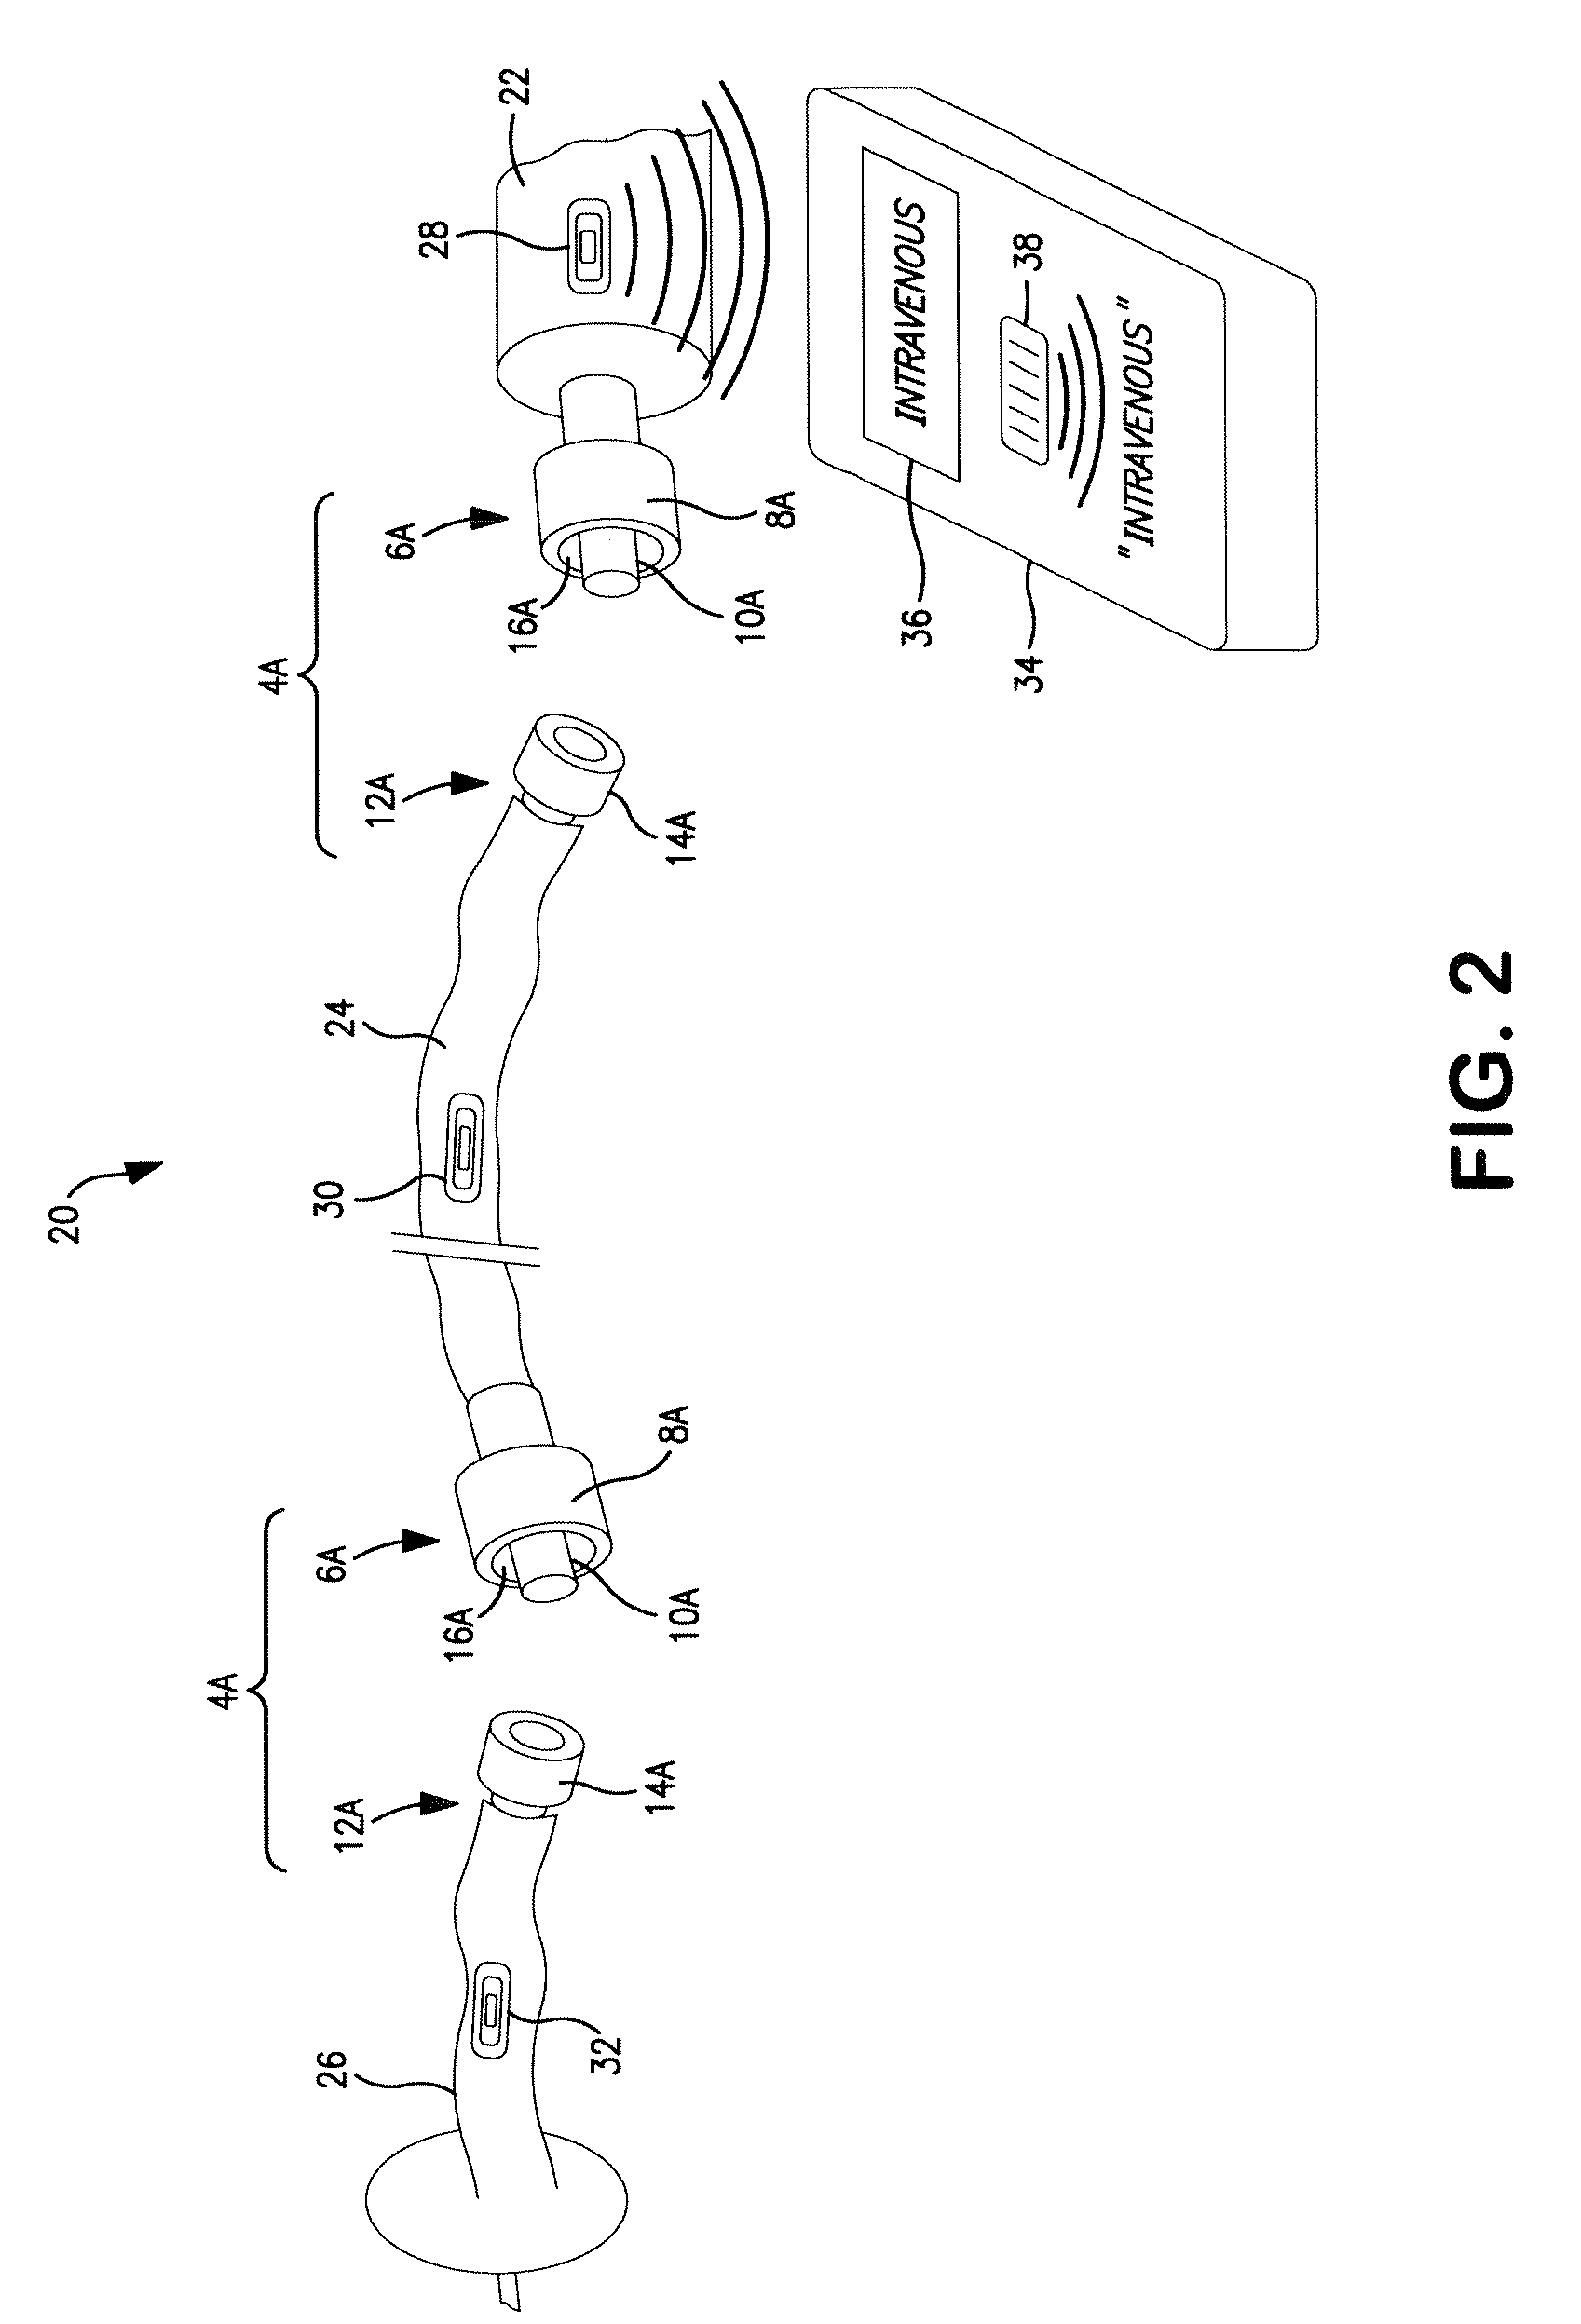 Drug delivery route-based connector system and method